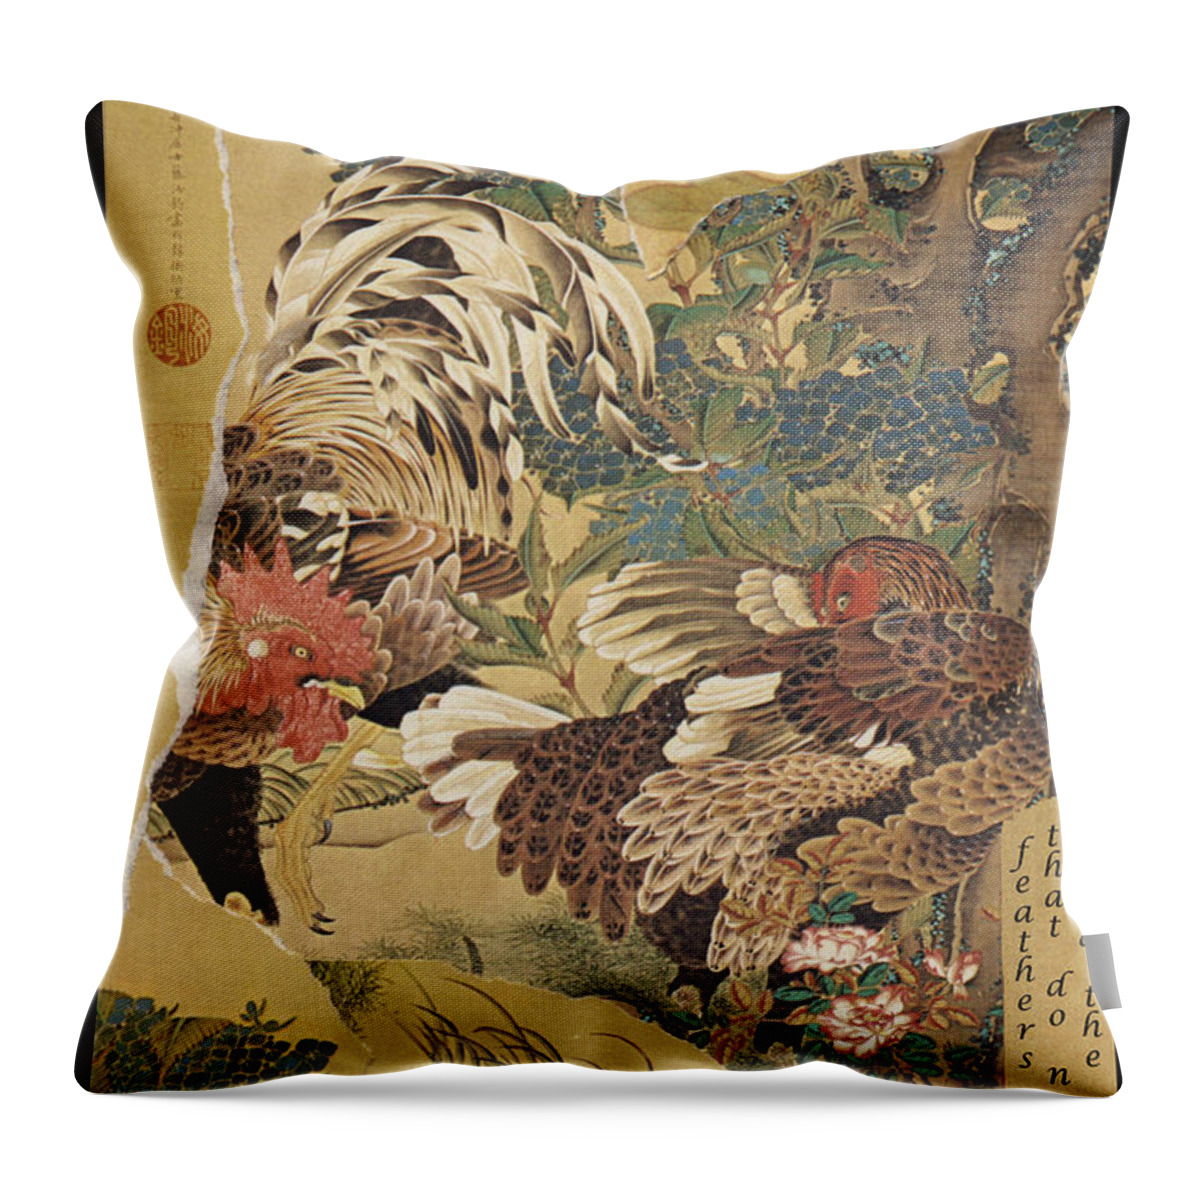 Collage Throw Pillow featuring the digital art Feathers by John Vincent Palozzi